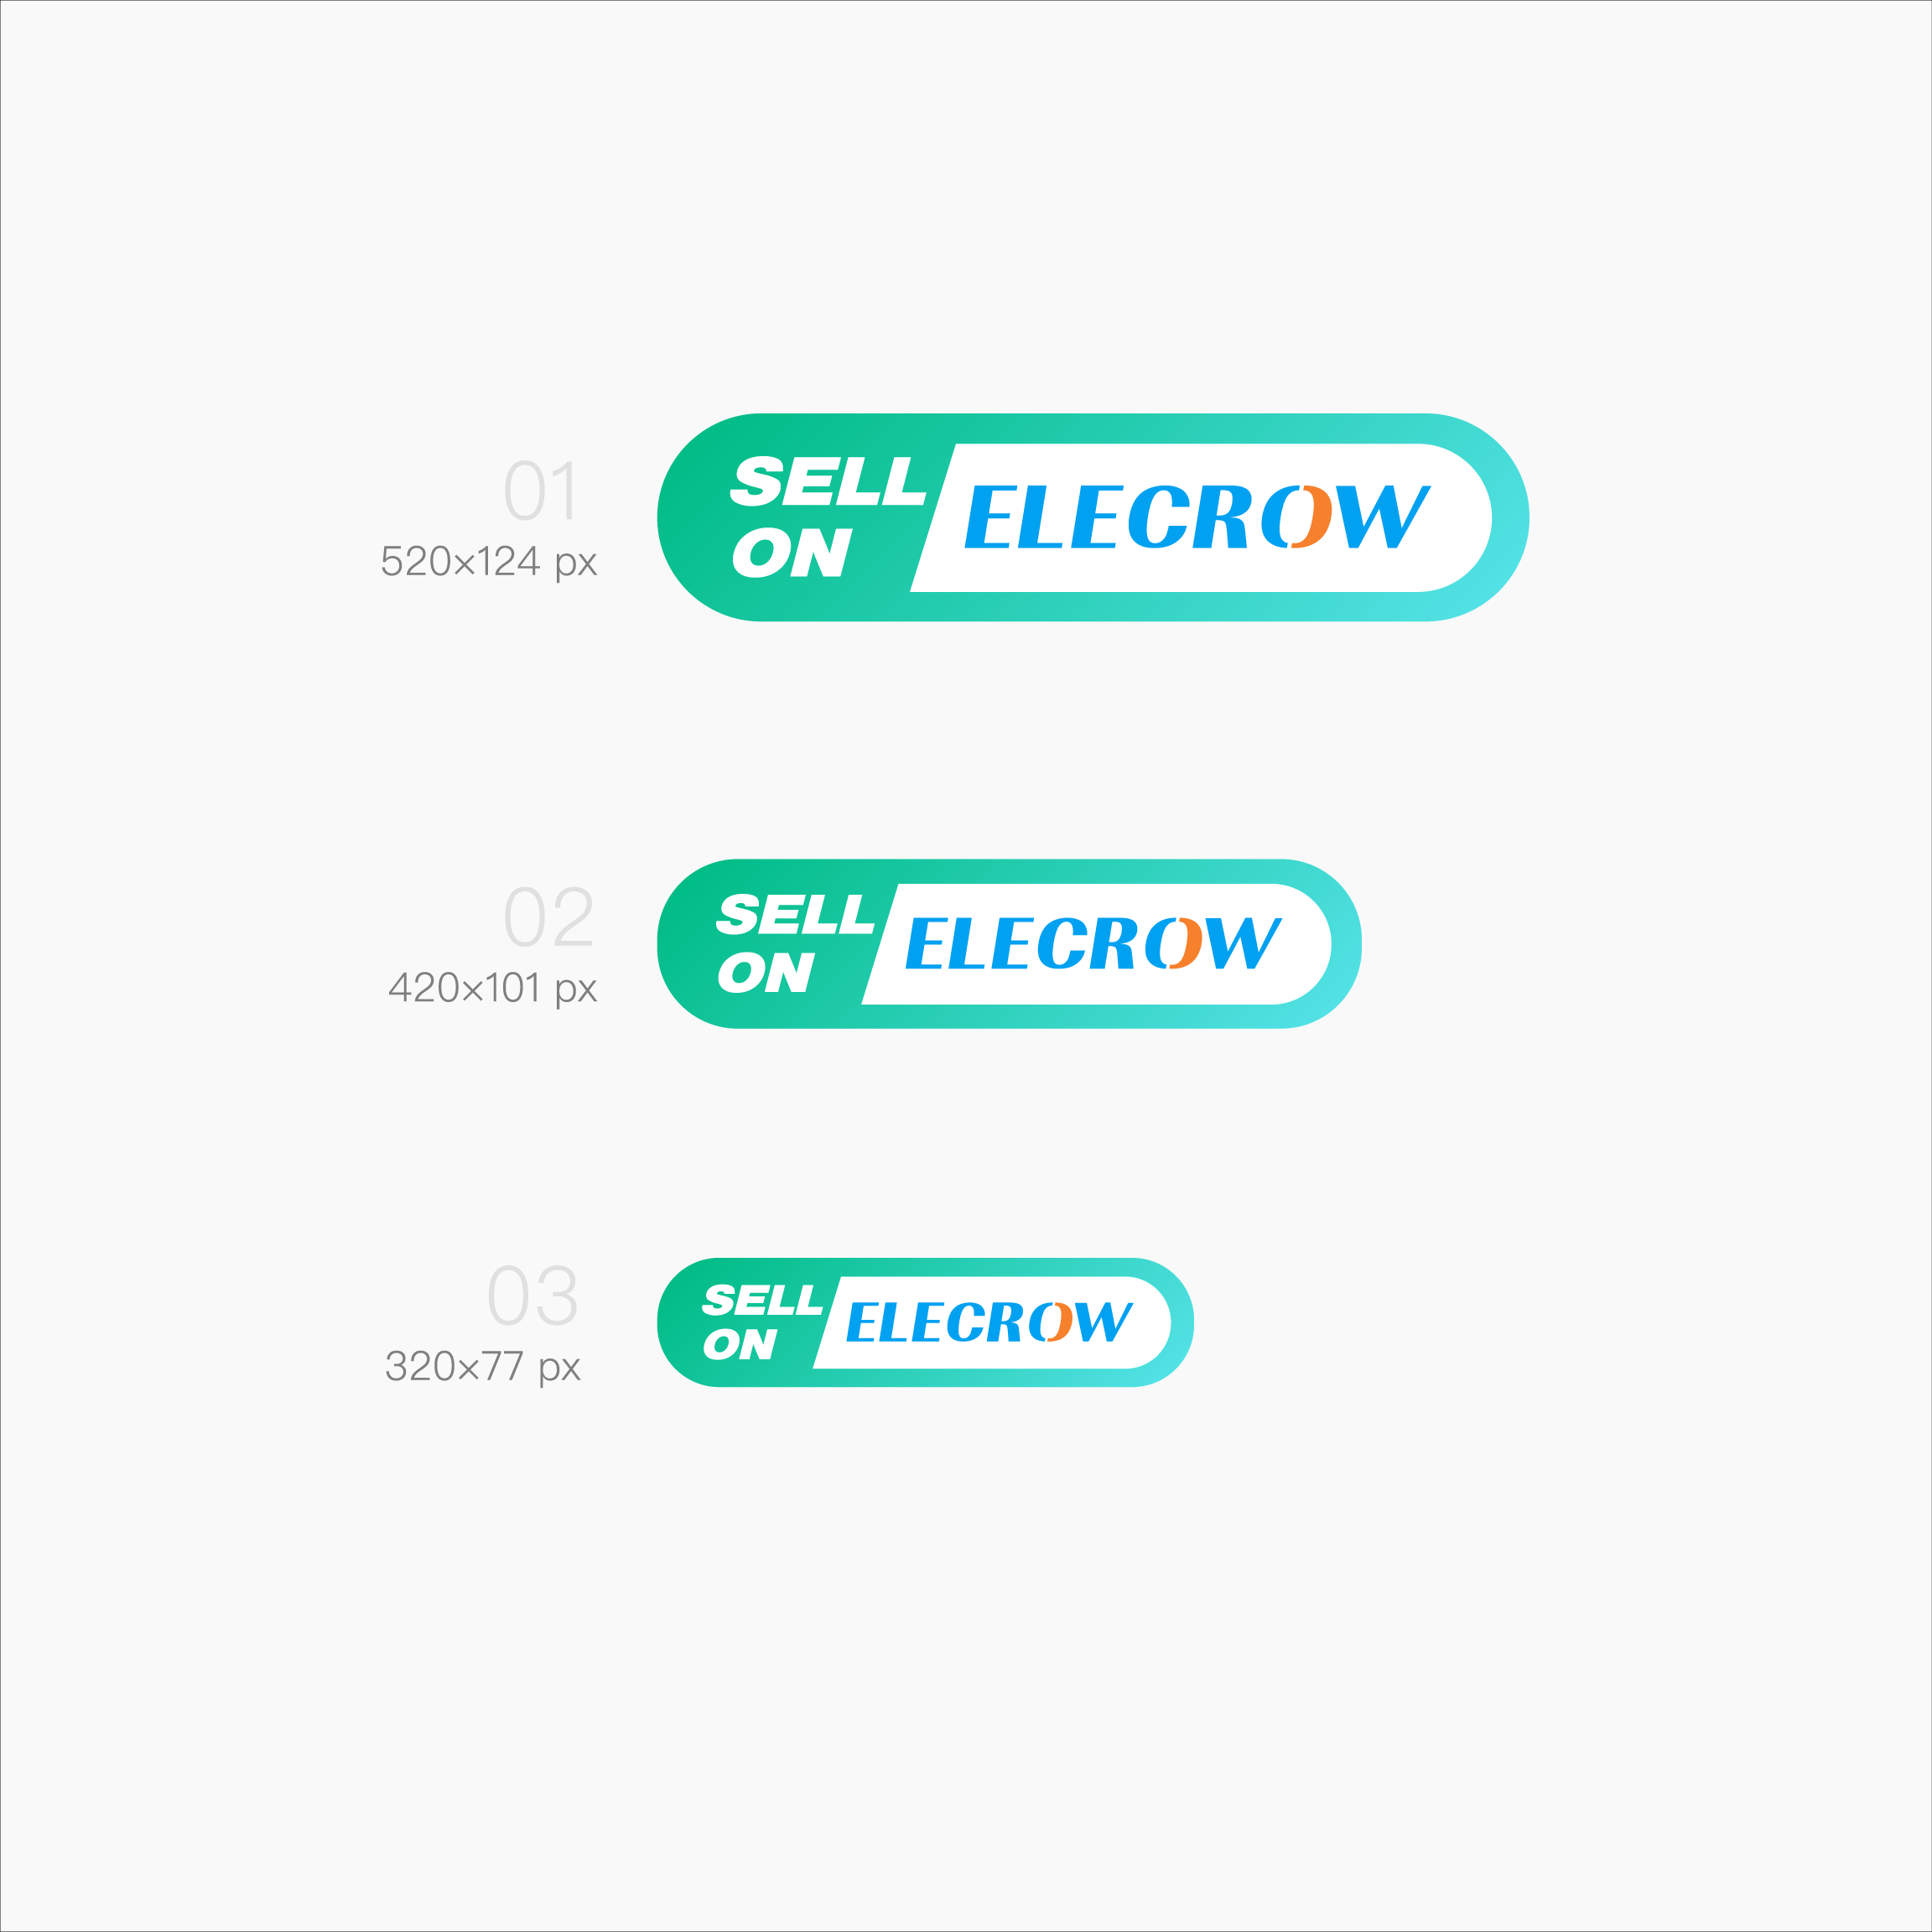 sell on elecrow 预览.png